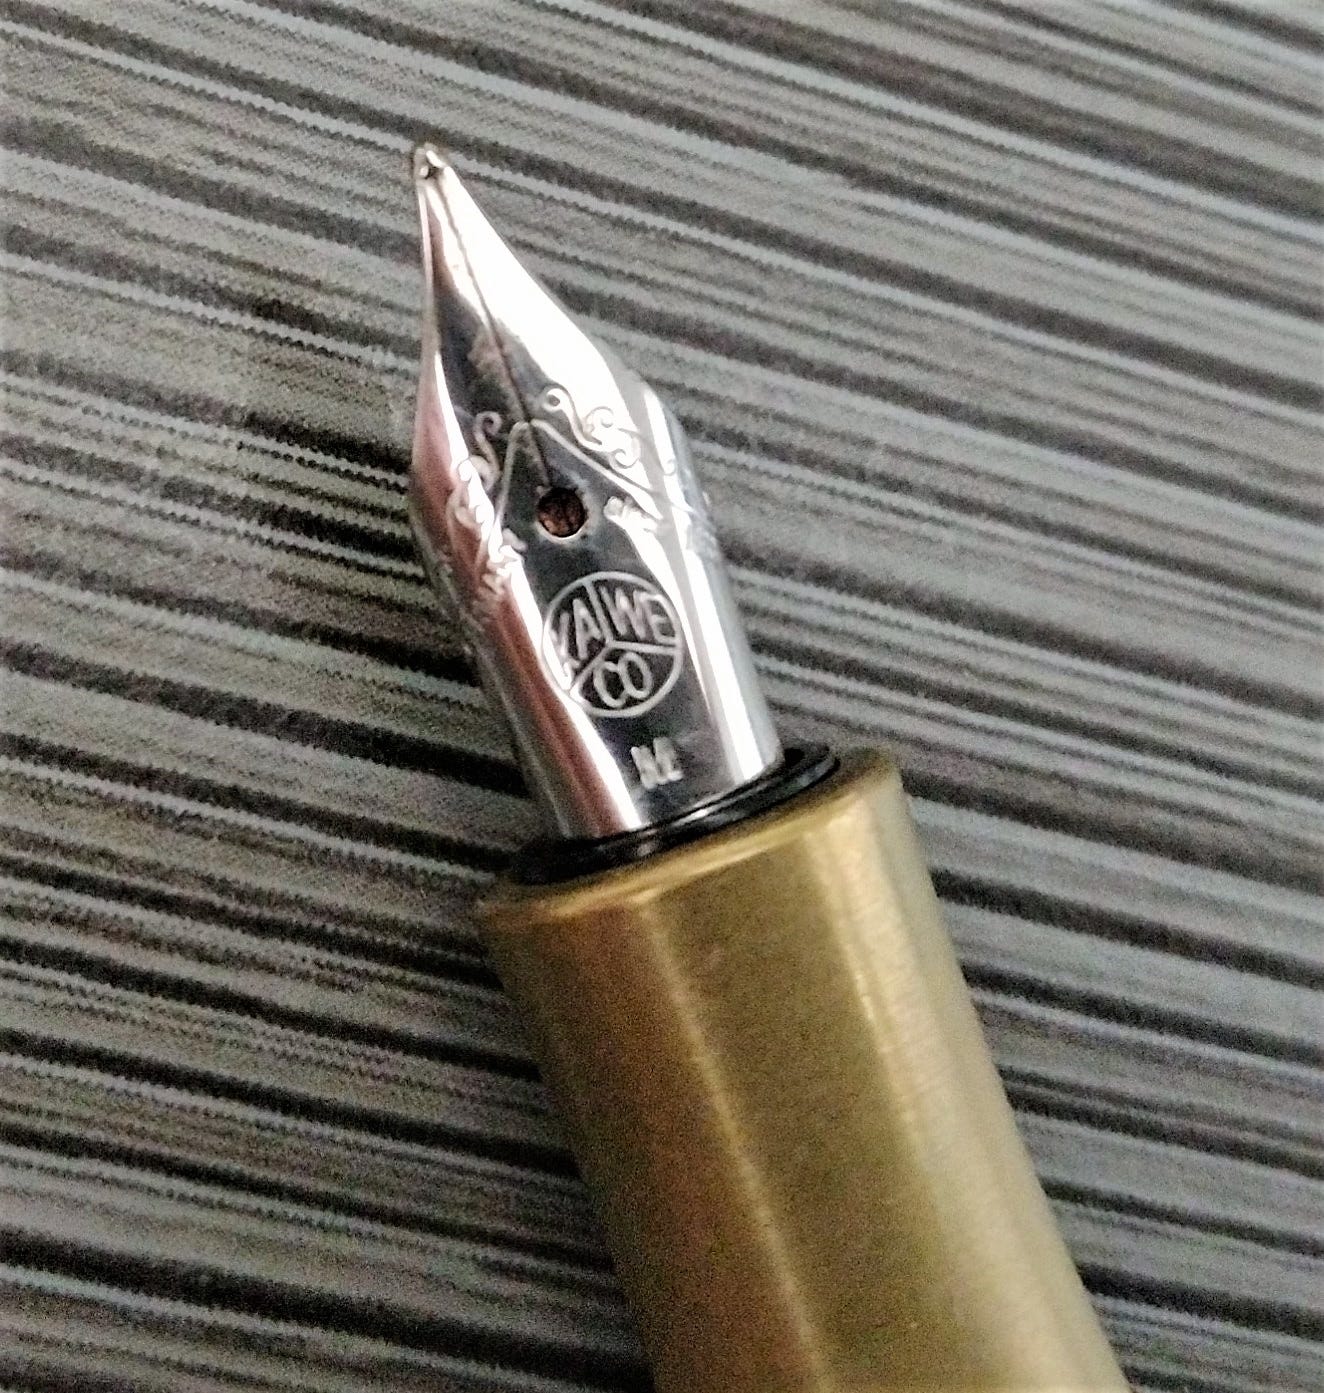 My 18 month old Kaweco Brass Sport. Inner barrel exposed for